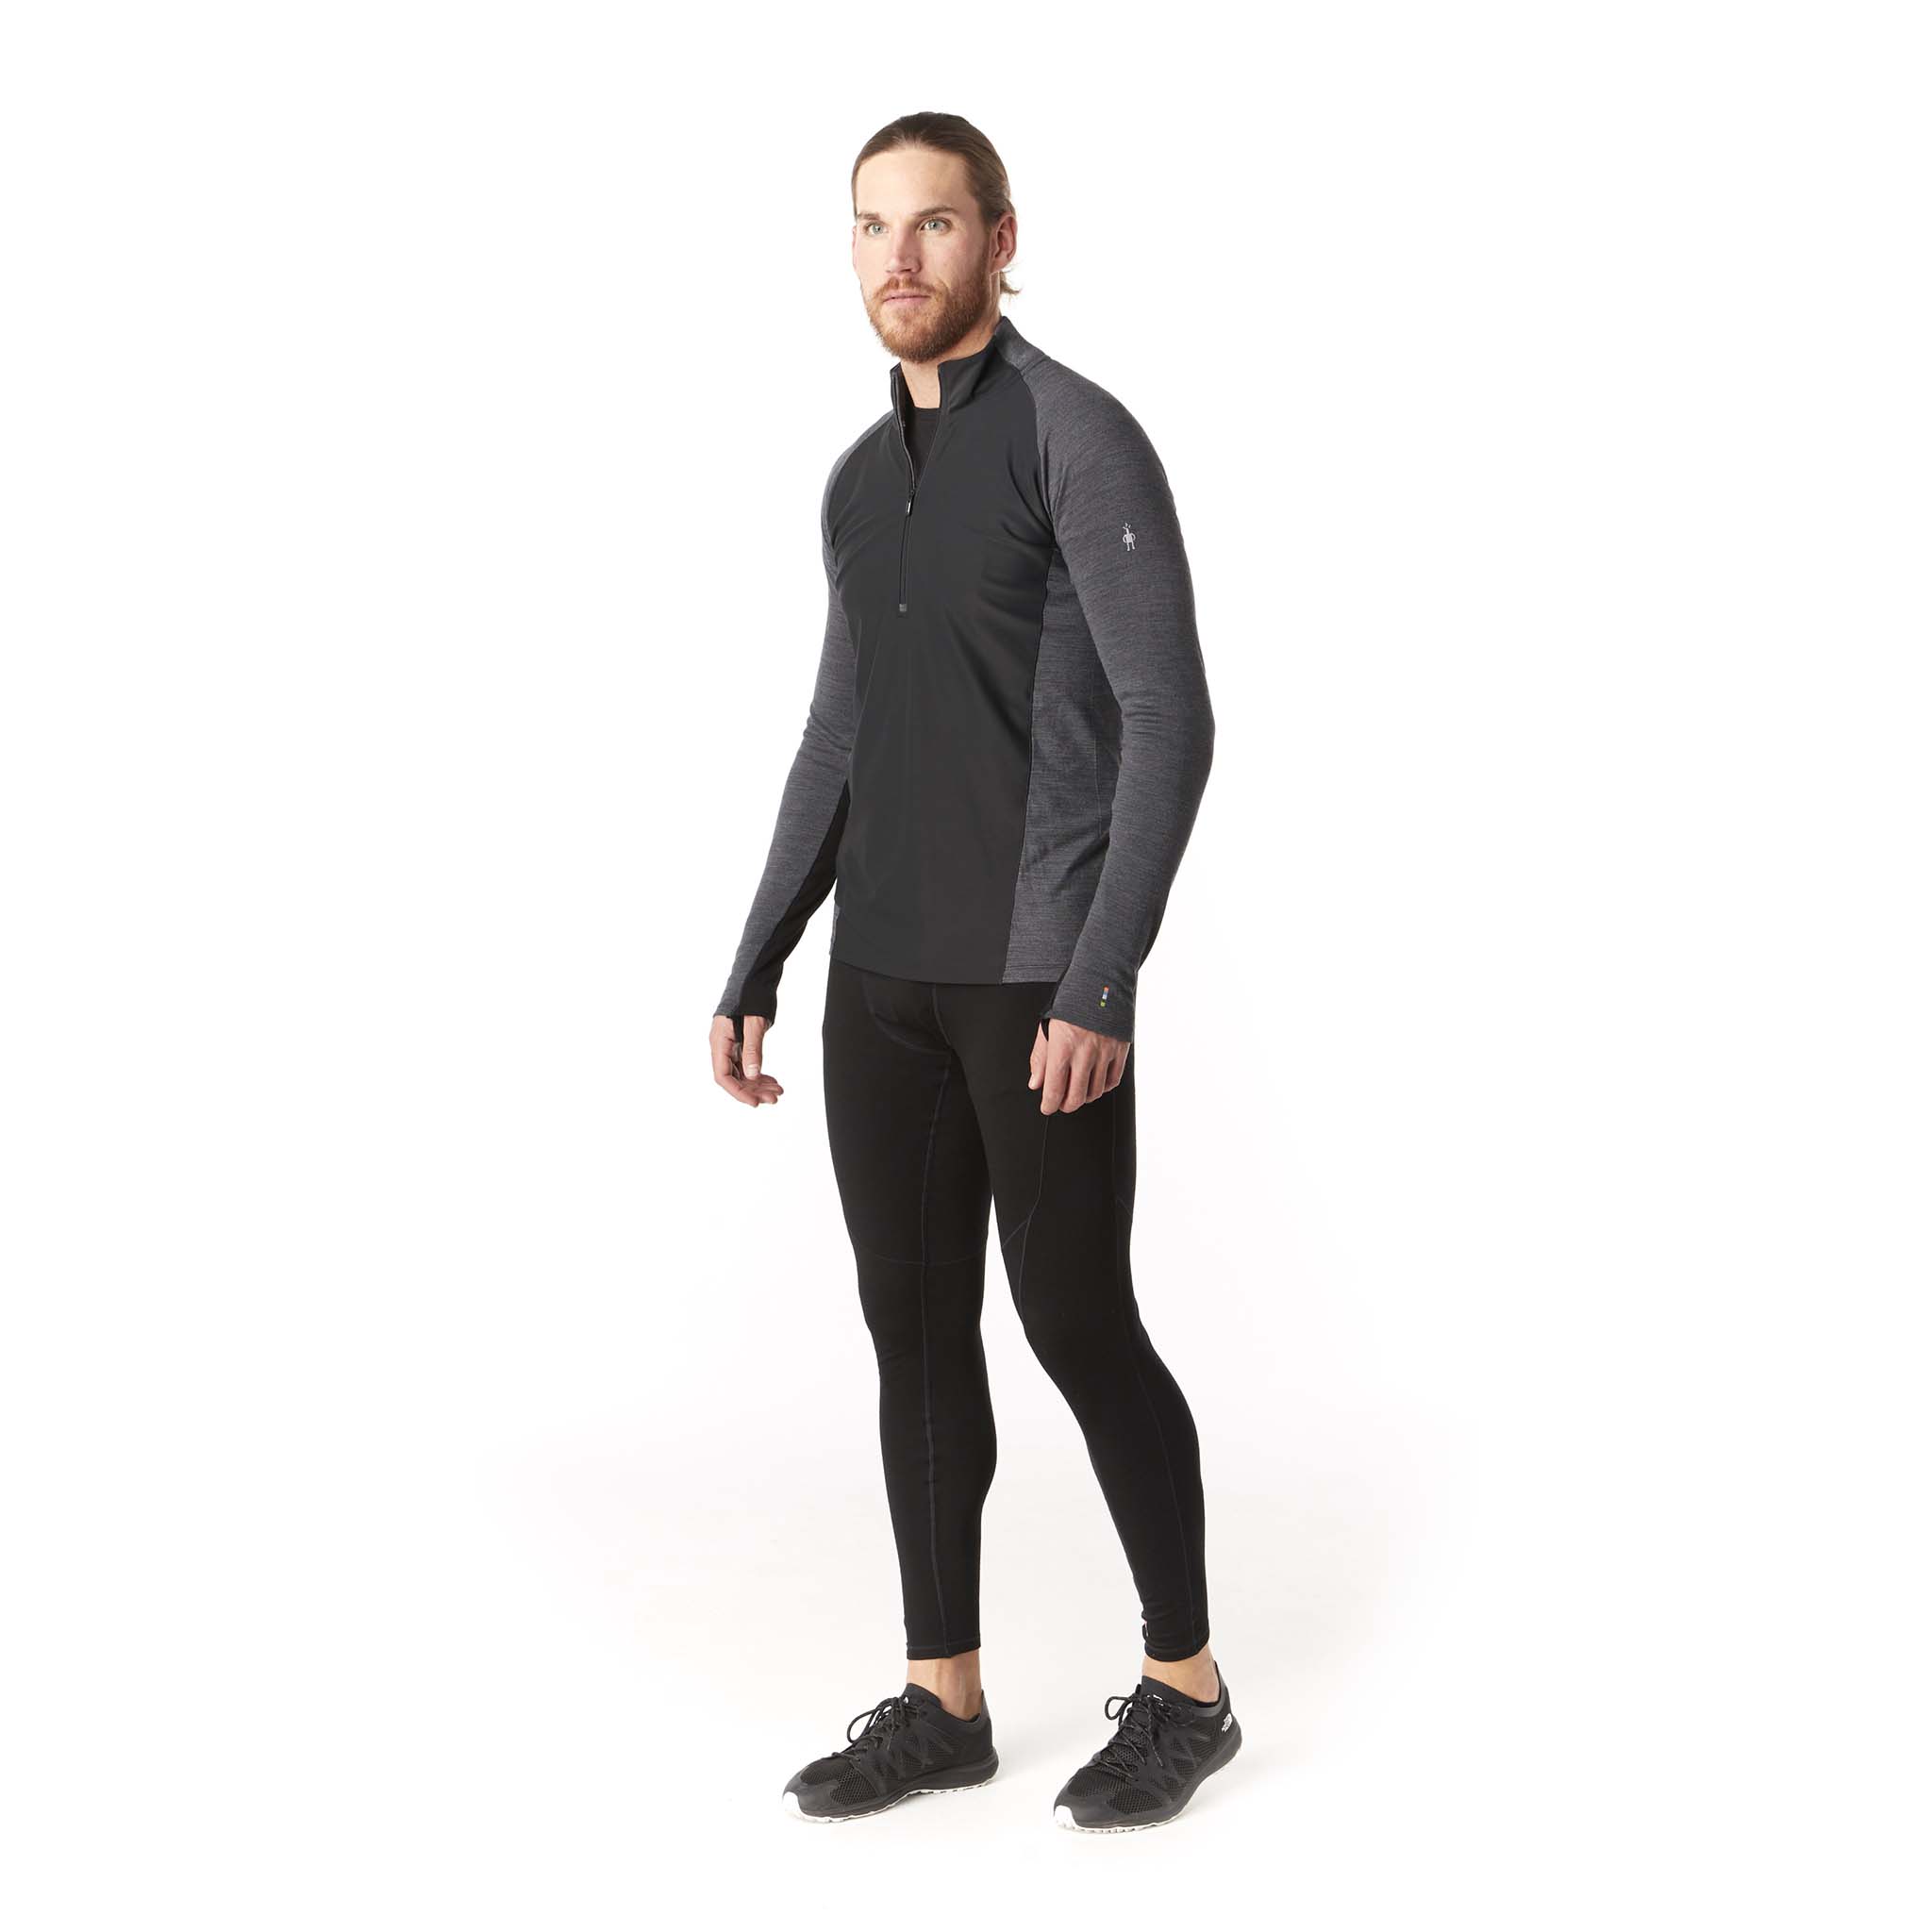 Smartwool Merino Sport 250 chandail coupe-vent 1/2 zip homme